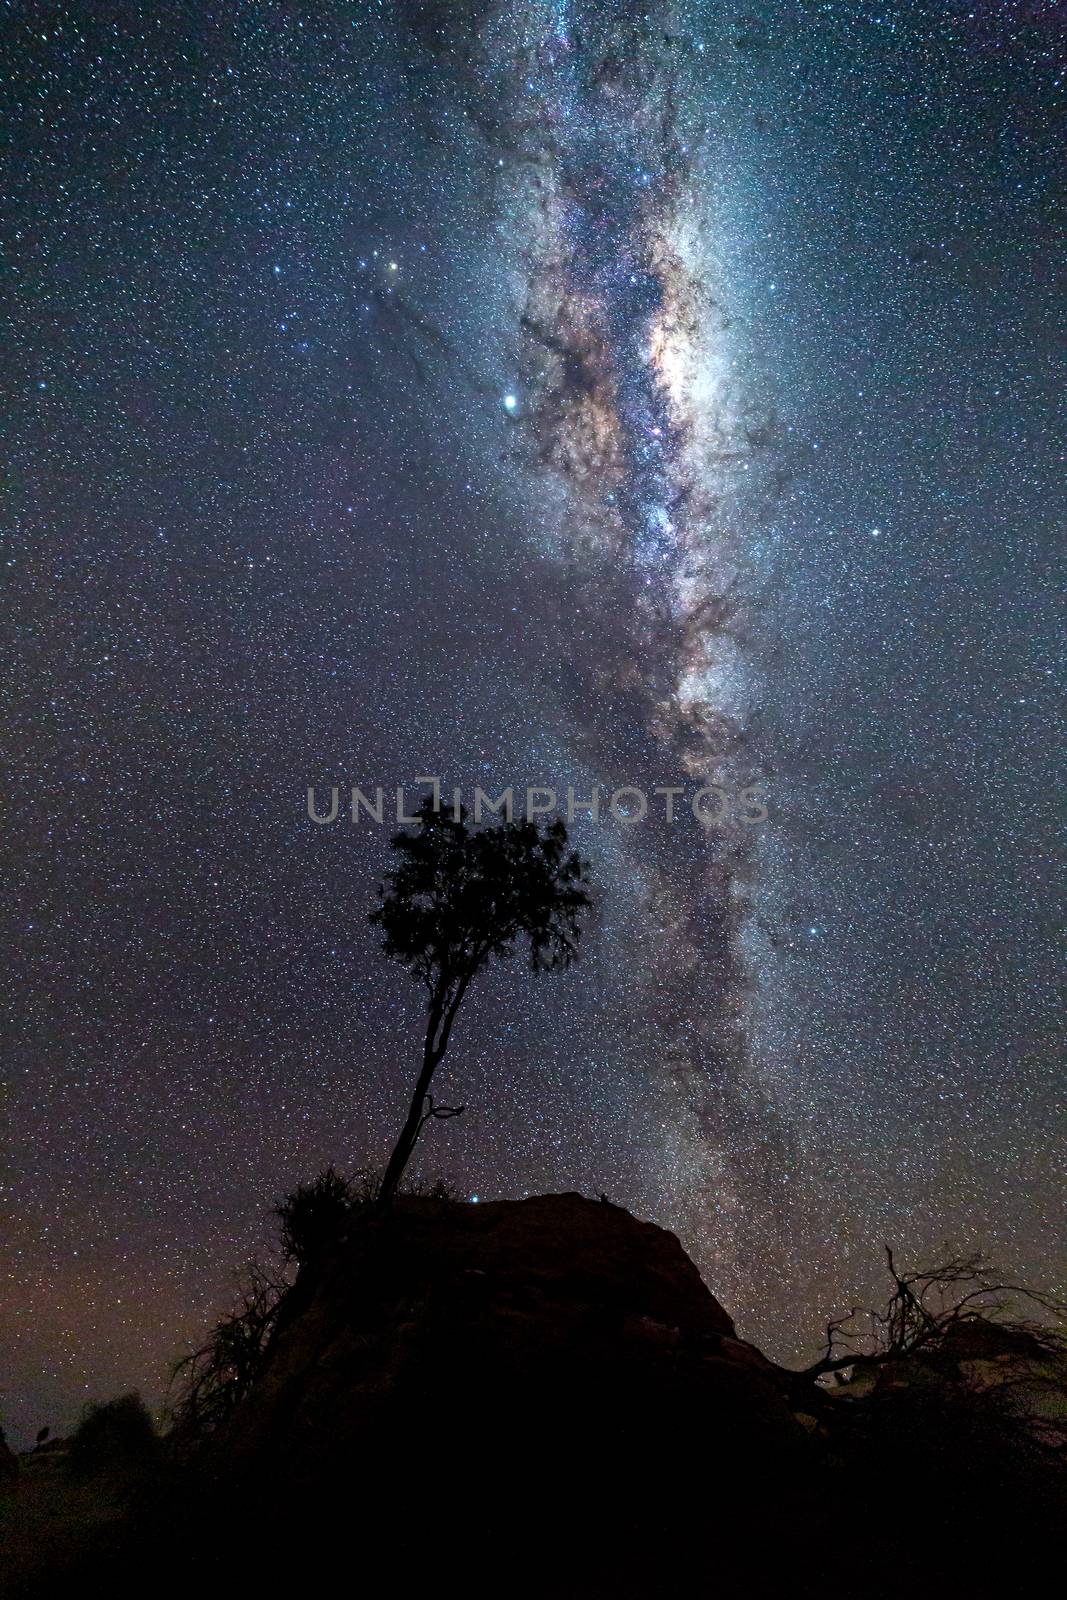 Lone tree silhouette bristling in the cool night breeze across an arid landscape under a milky way sky of stars. High ISO